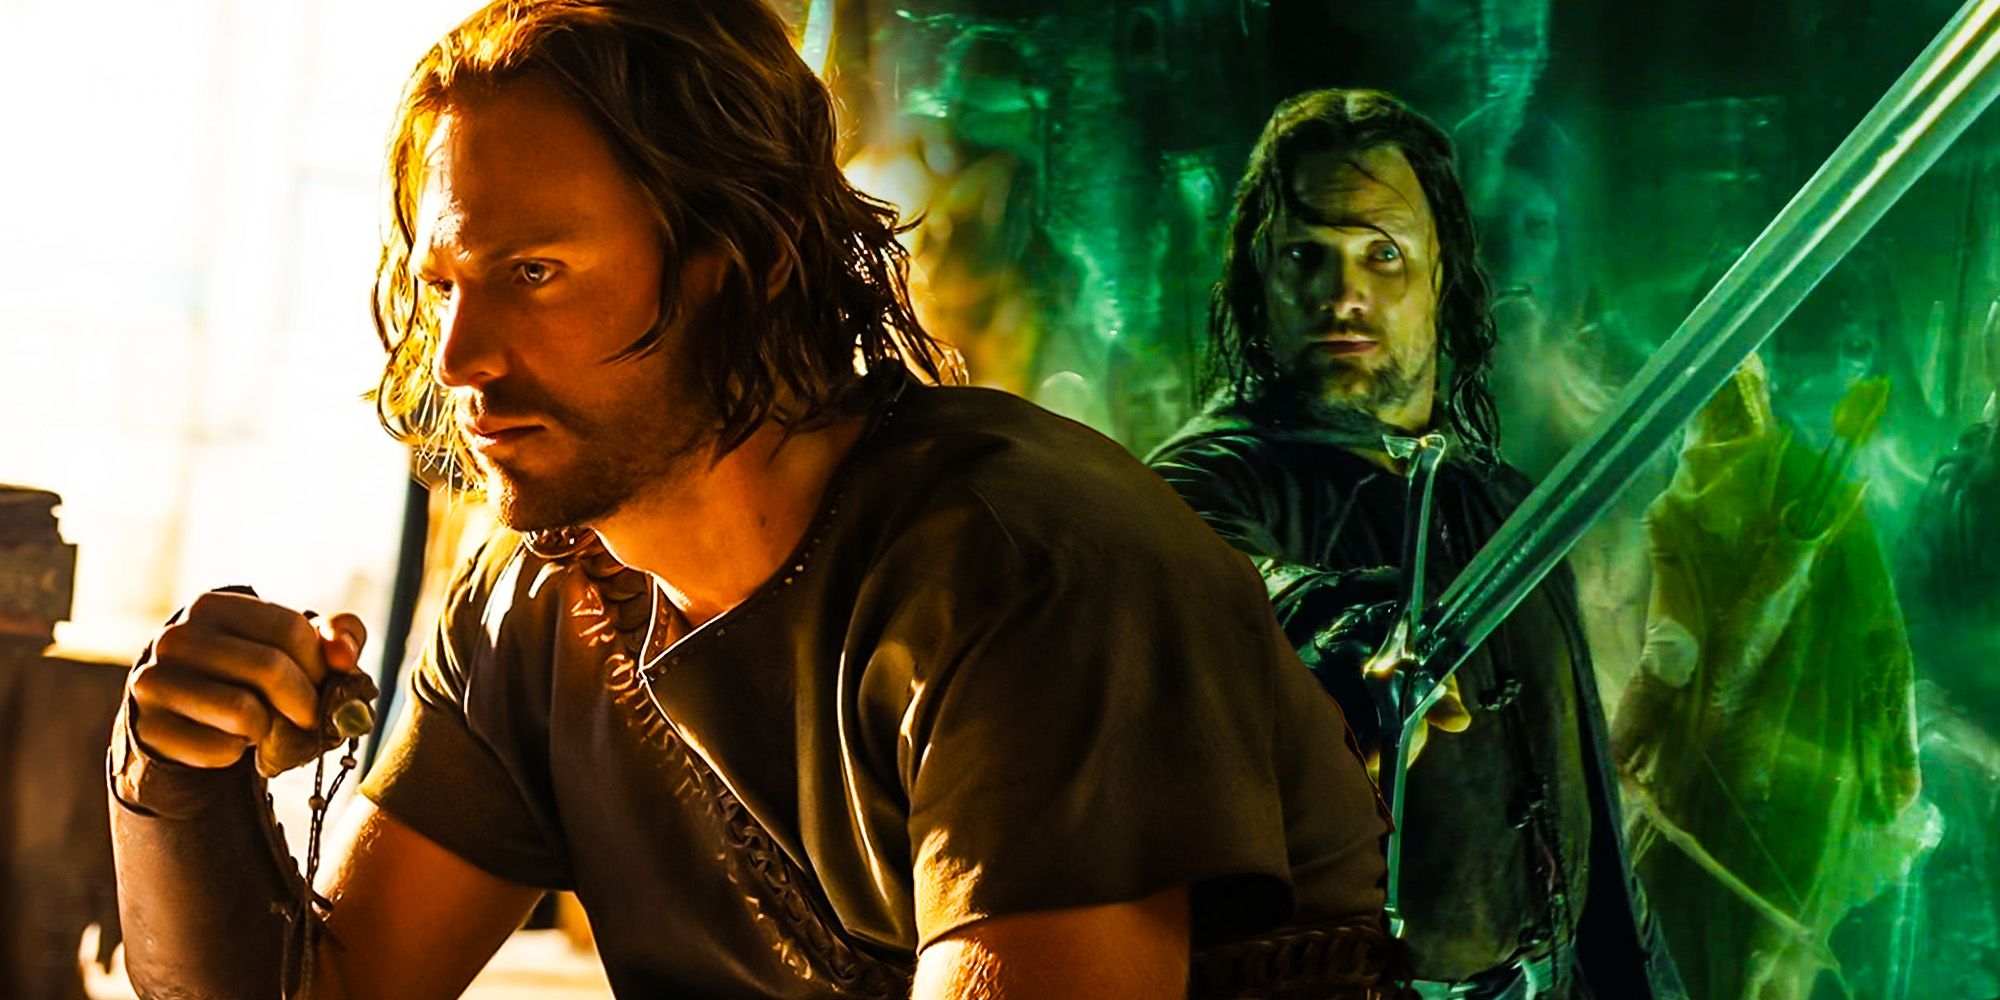 Who Is Elendil, and How Is He Connected to Isildur and Aragorn?